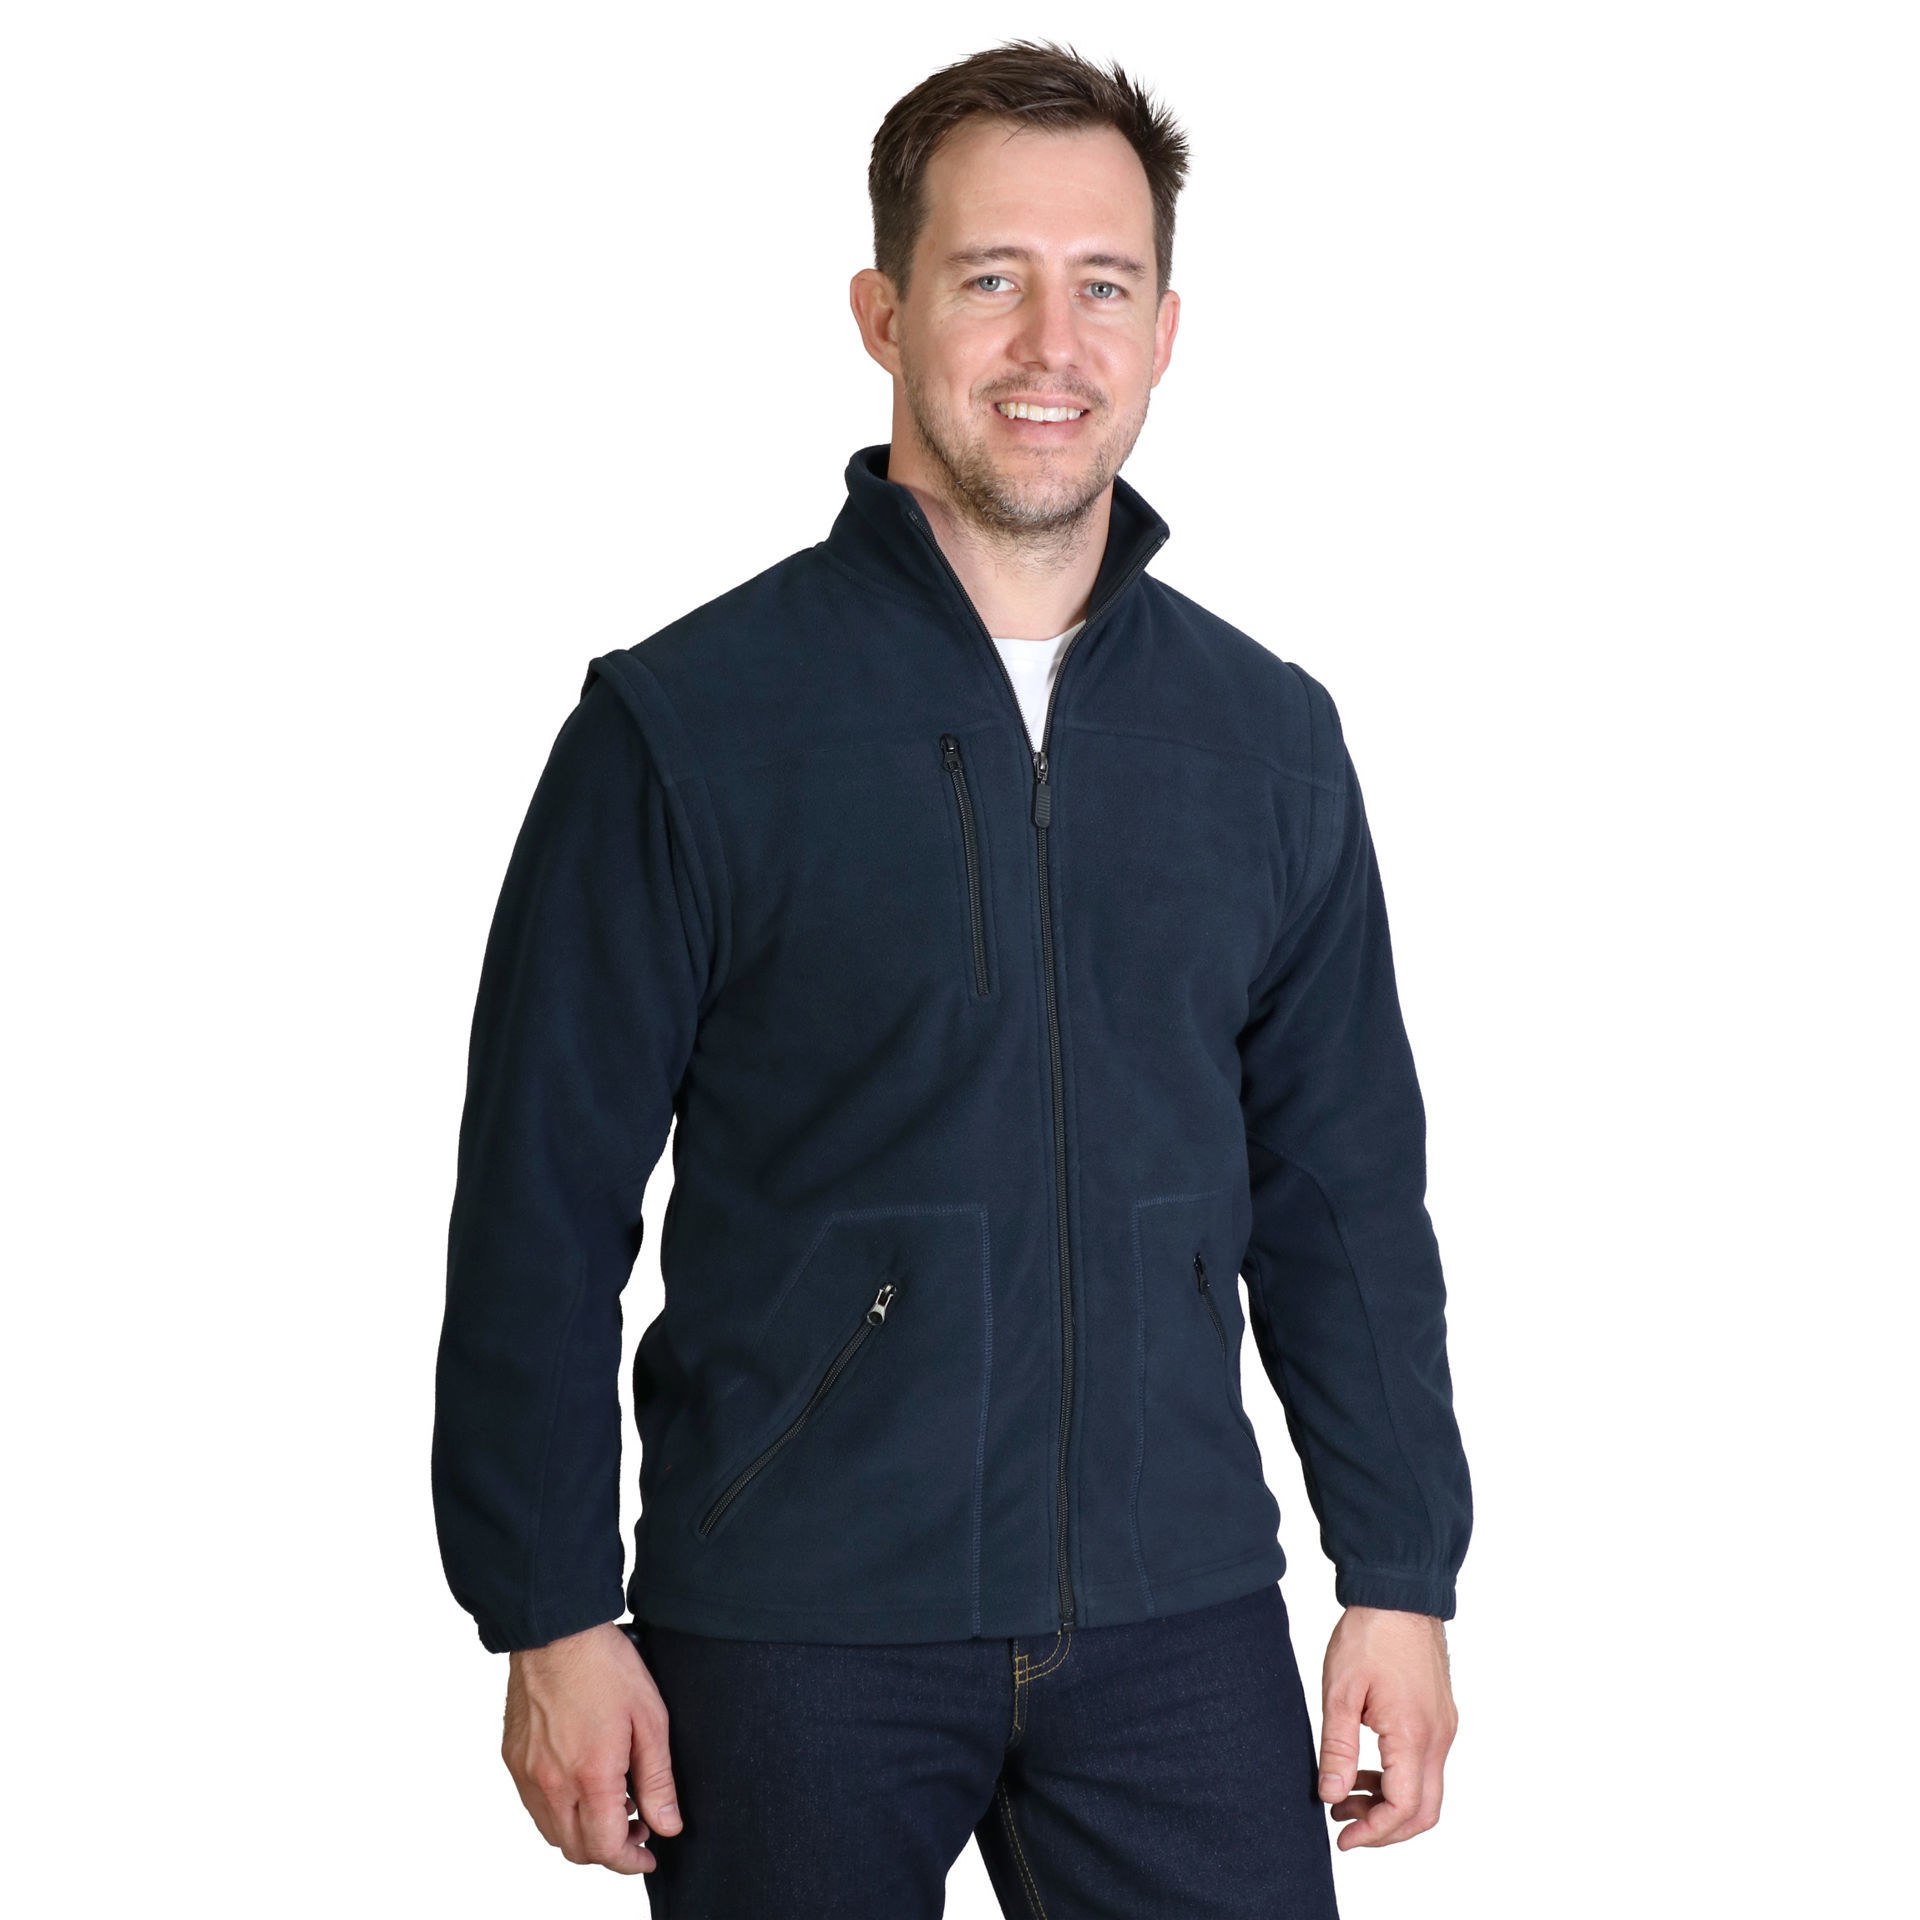 Global Citizen Inc. - Manufacturers and suppliers of promotional, corporate  and uniform apparel.. -Zip off sleeve Polar Fleece